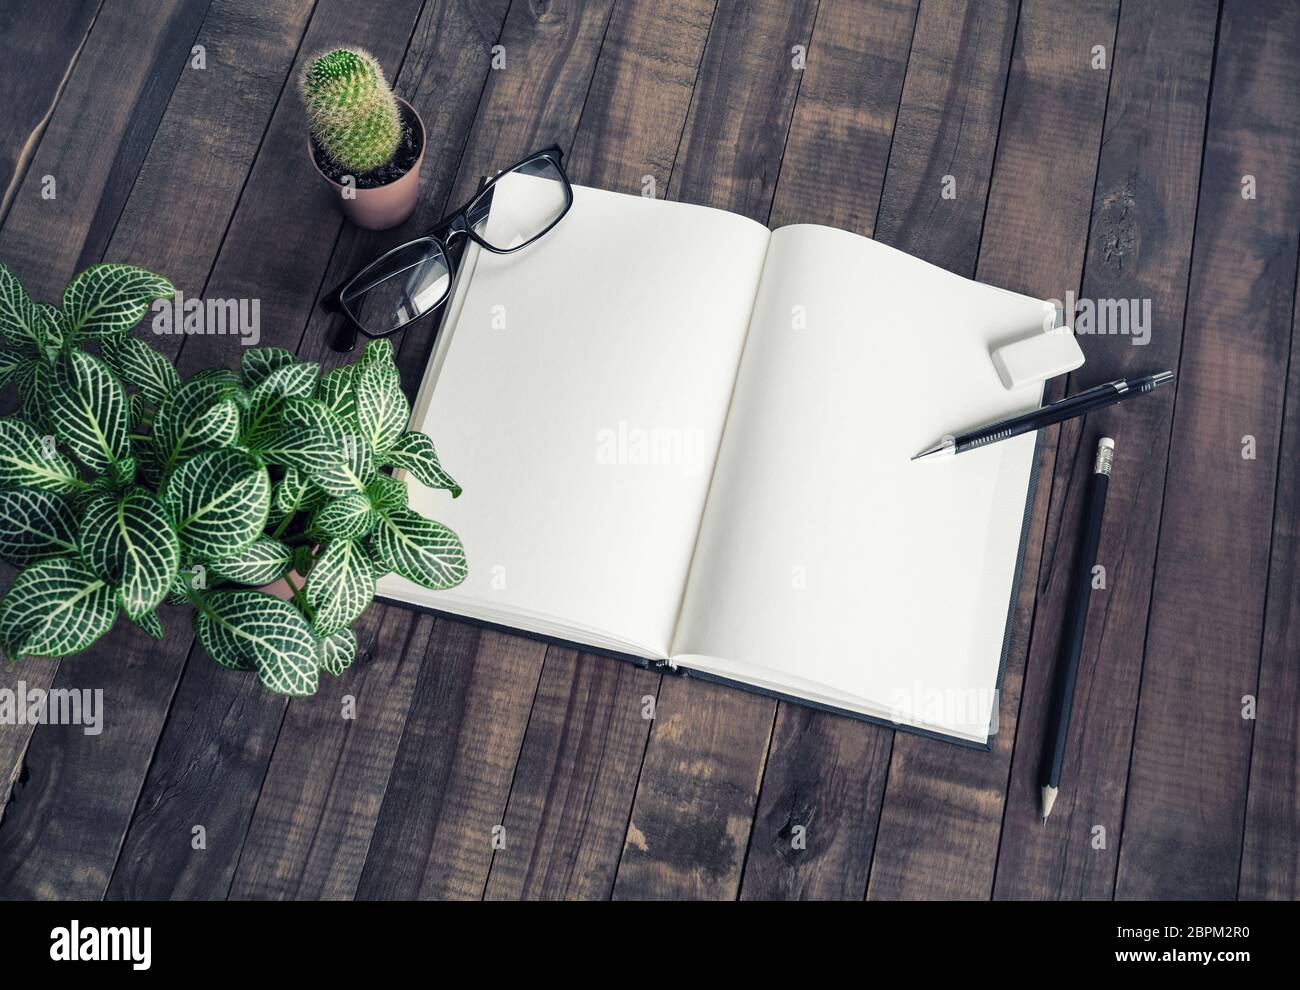 Blank notepad, stationery and plants on vintage wood table background. Stock Photo